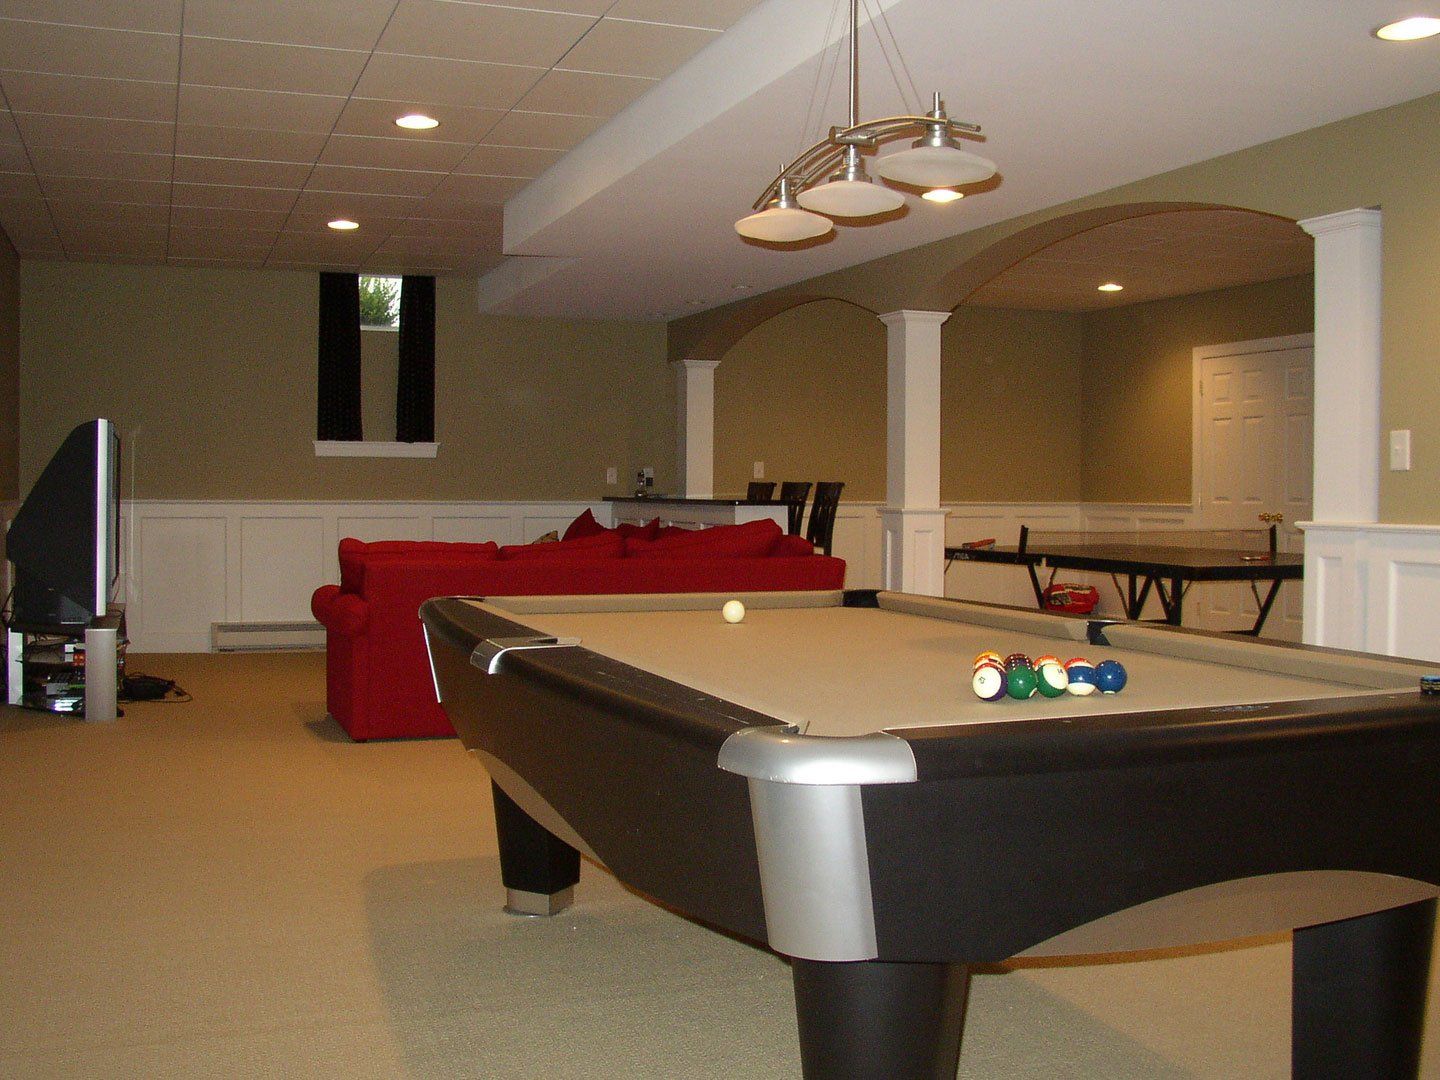 Akron, OH area basement with pool table after basement remodeling